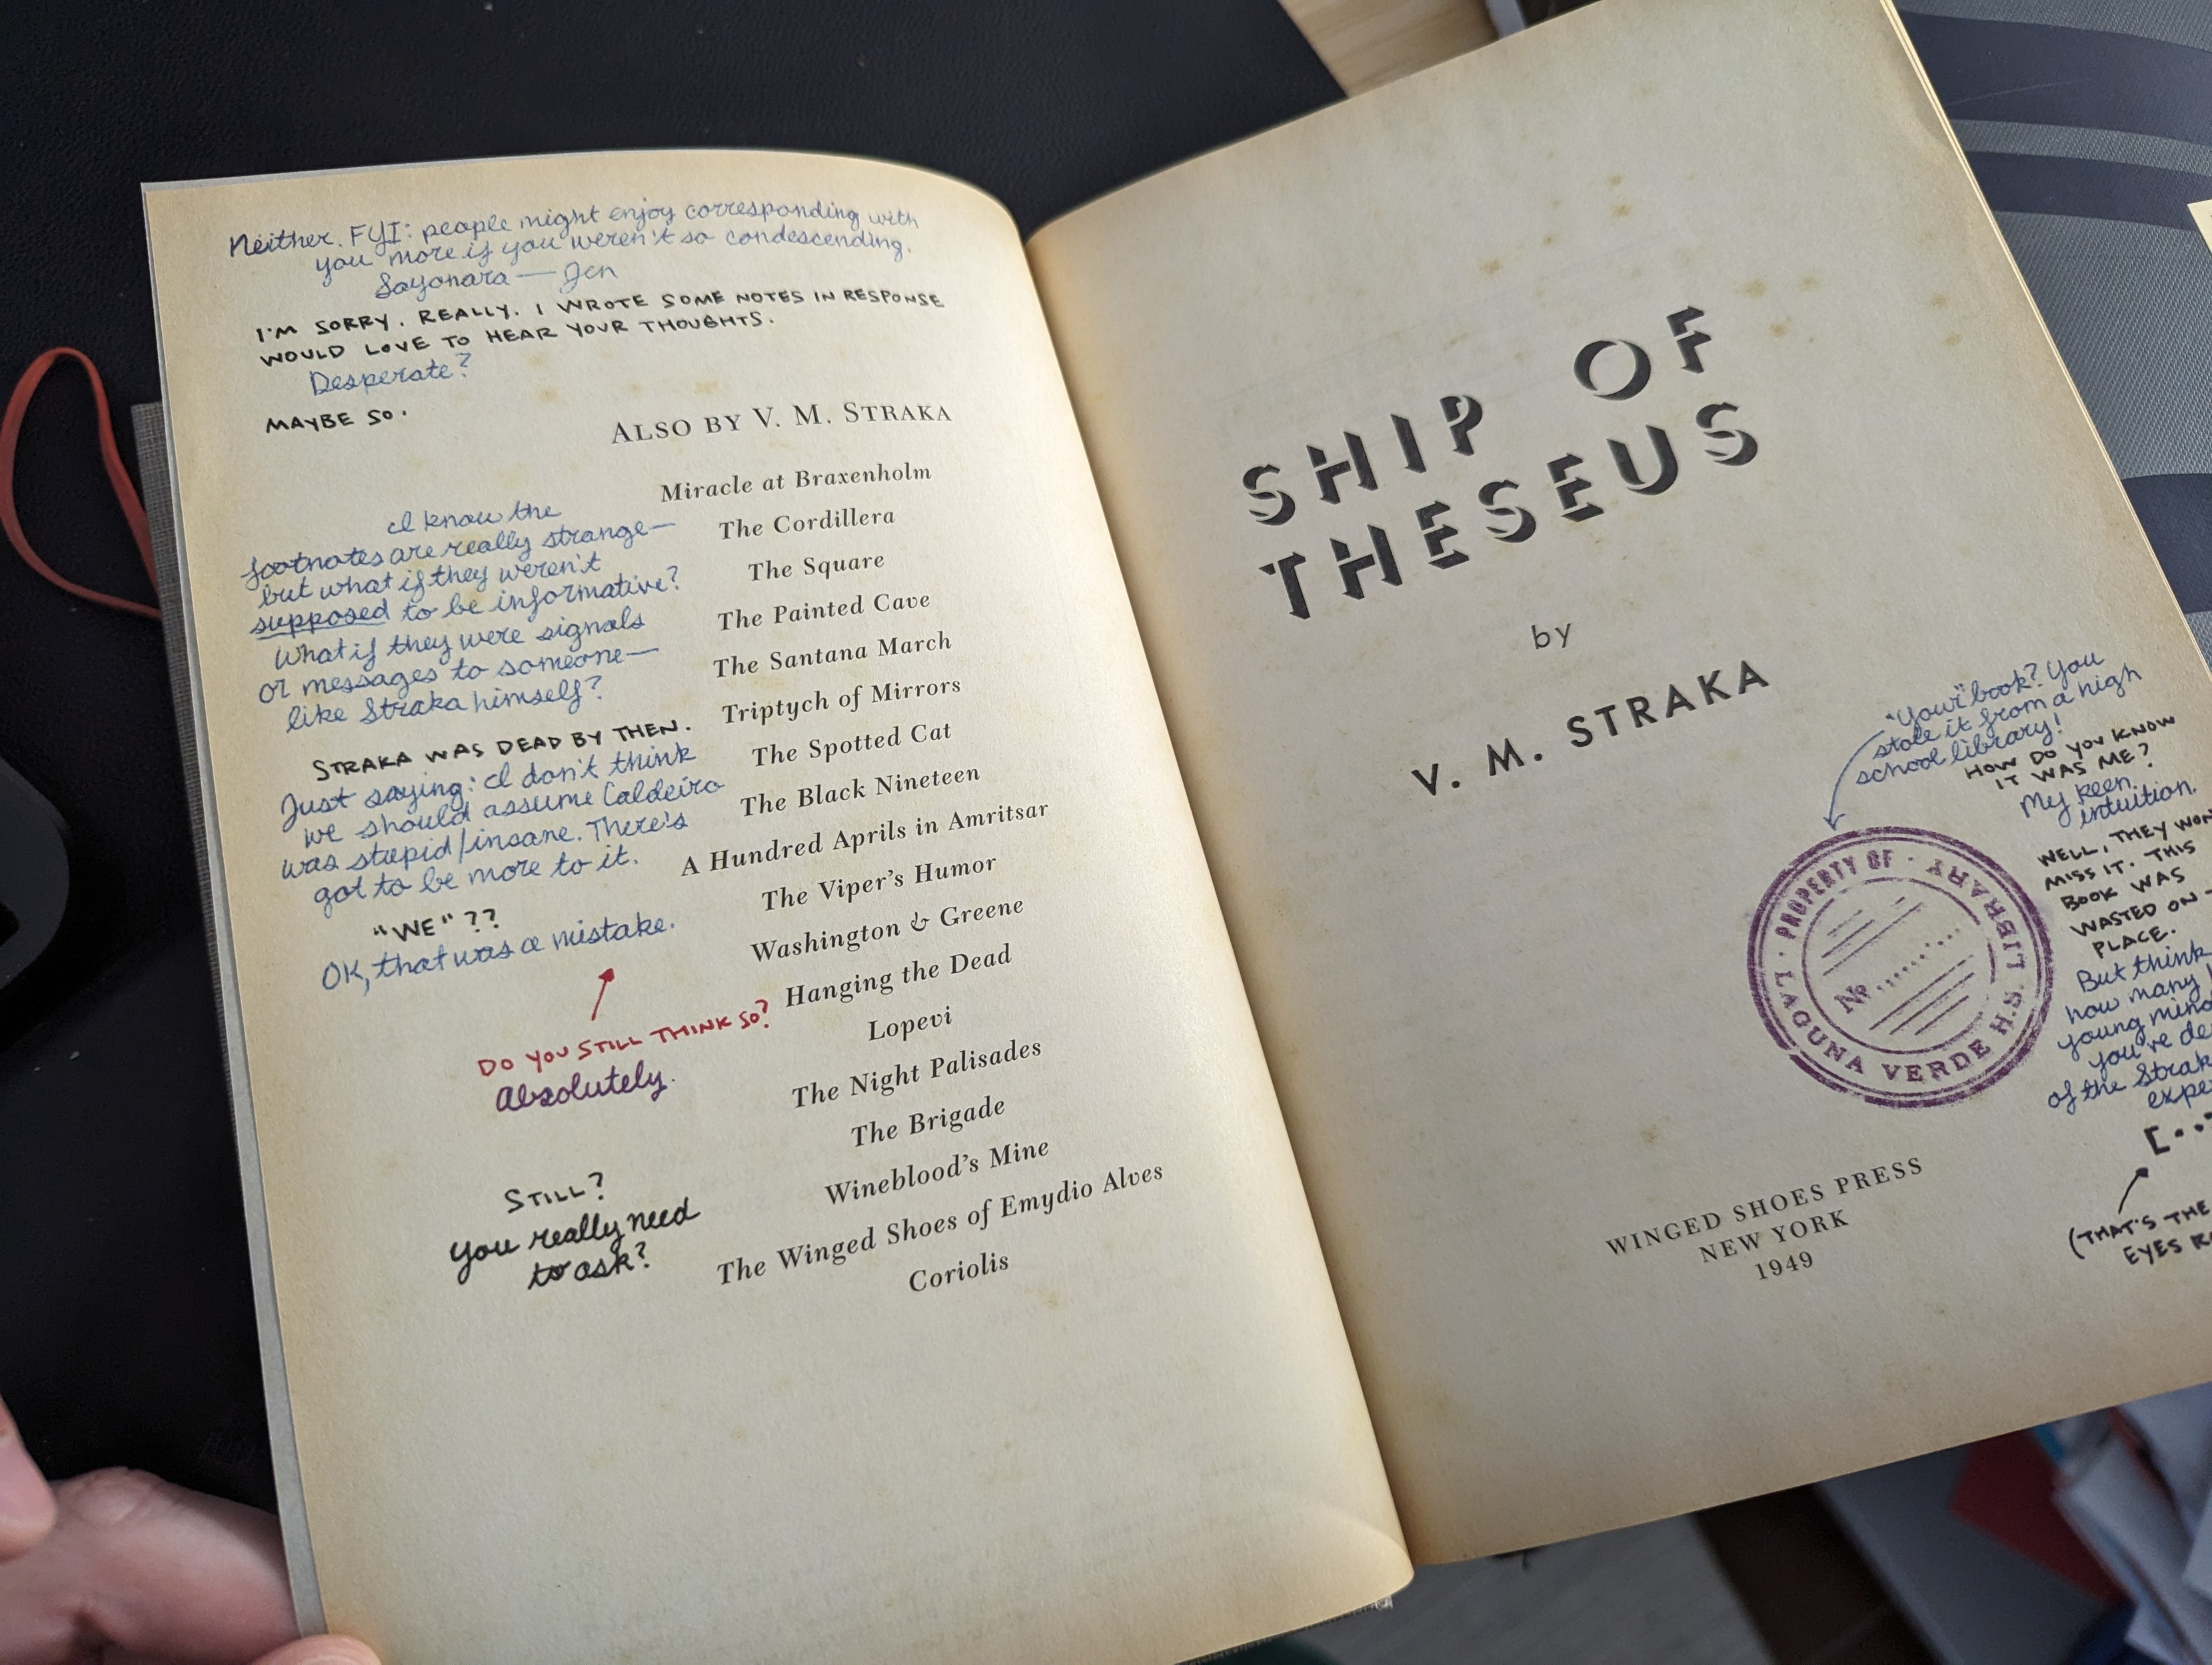 The title pages of the book contains some notes written by two different fictional characters.